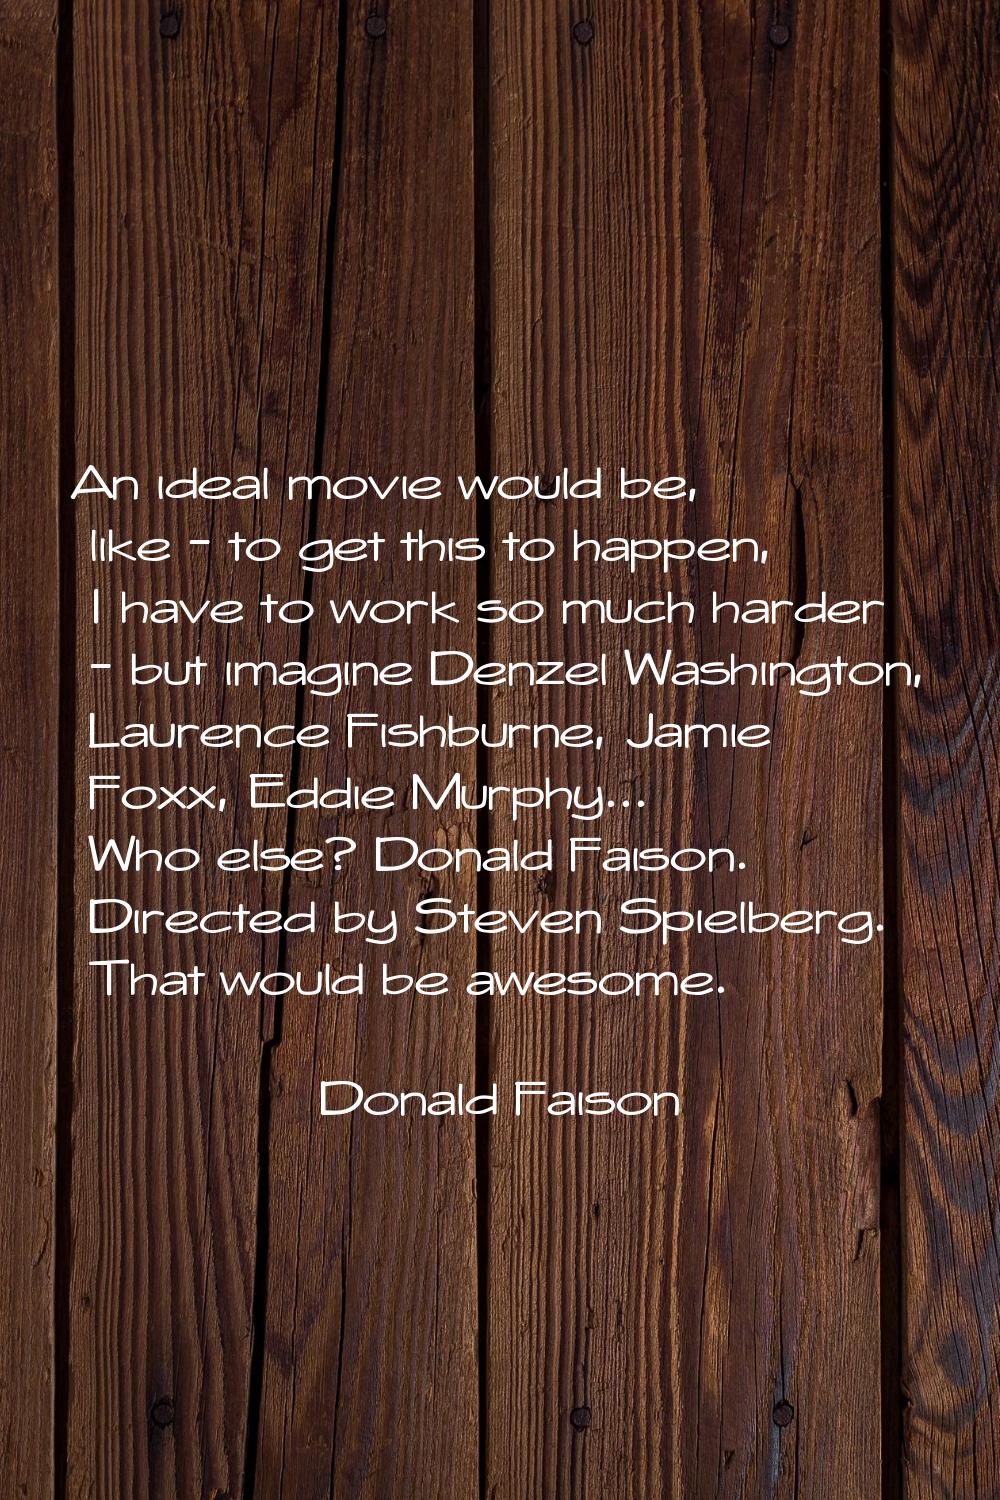 An ideal movie would be, like - to get this to happen, I have to work so much harder - but imagine 